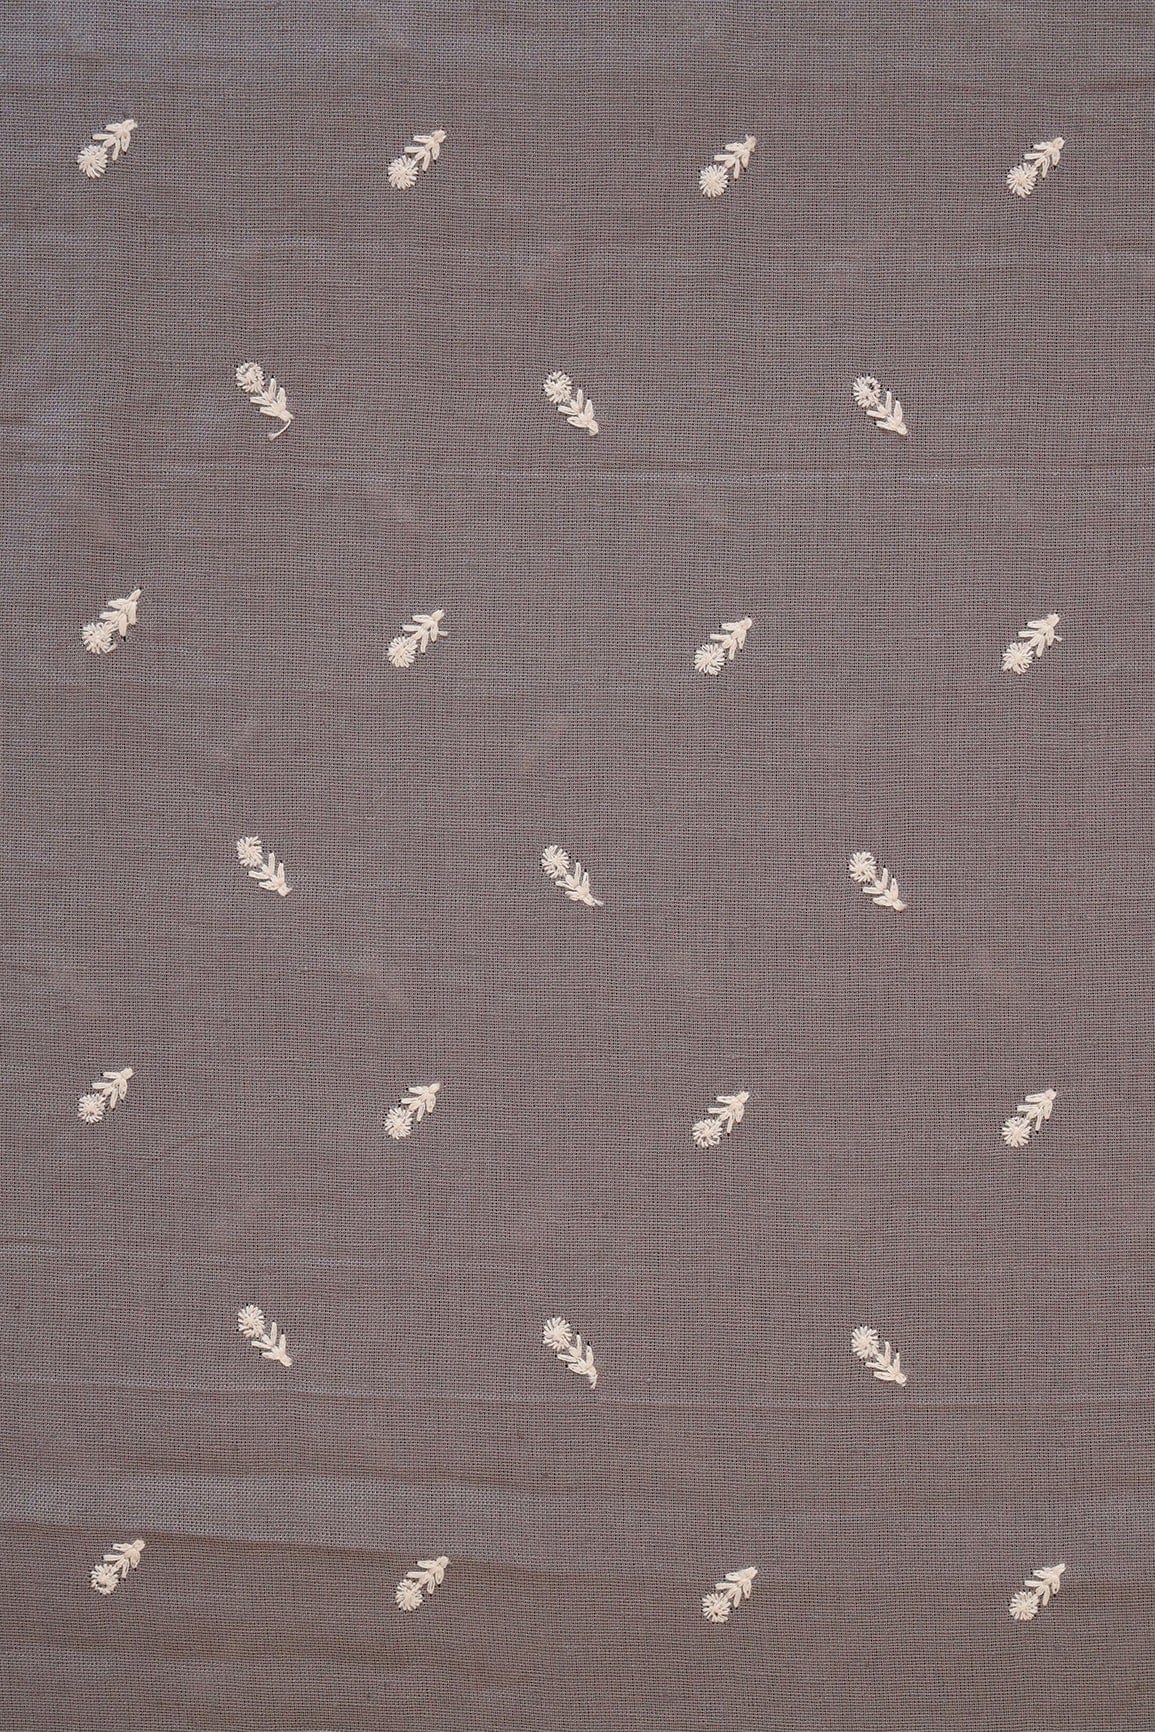 doeraa Embroidery Fabrics White Thread Small Floral Motif Embroidery Work On Grey Cotton Linen Fabric